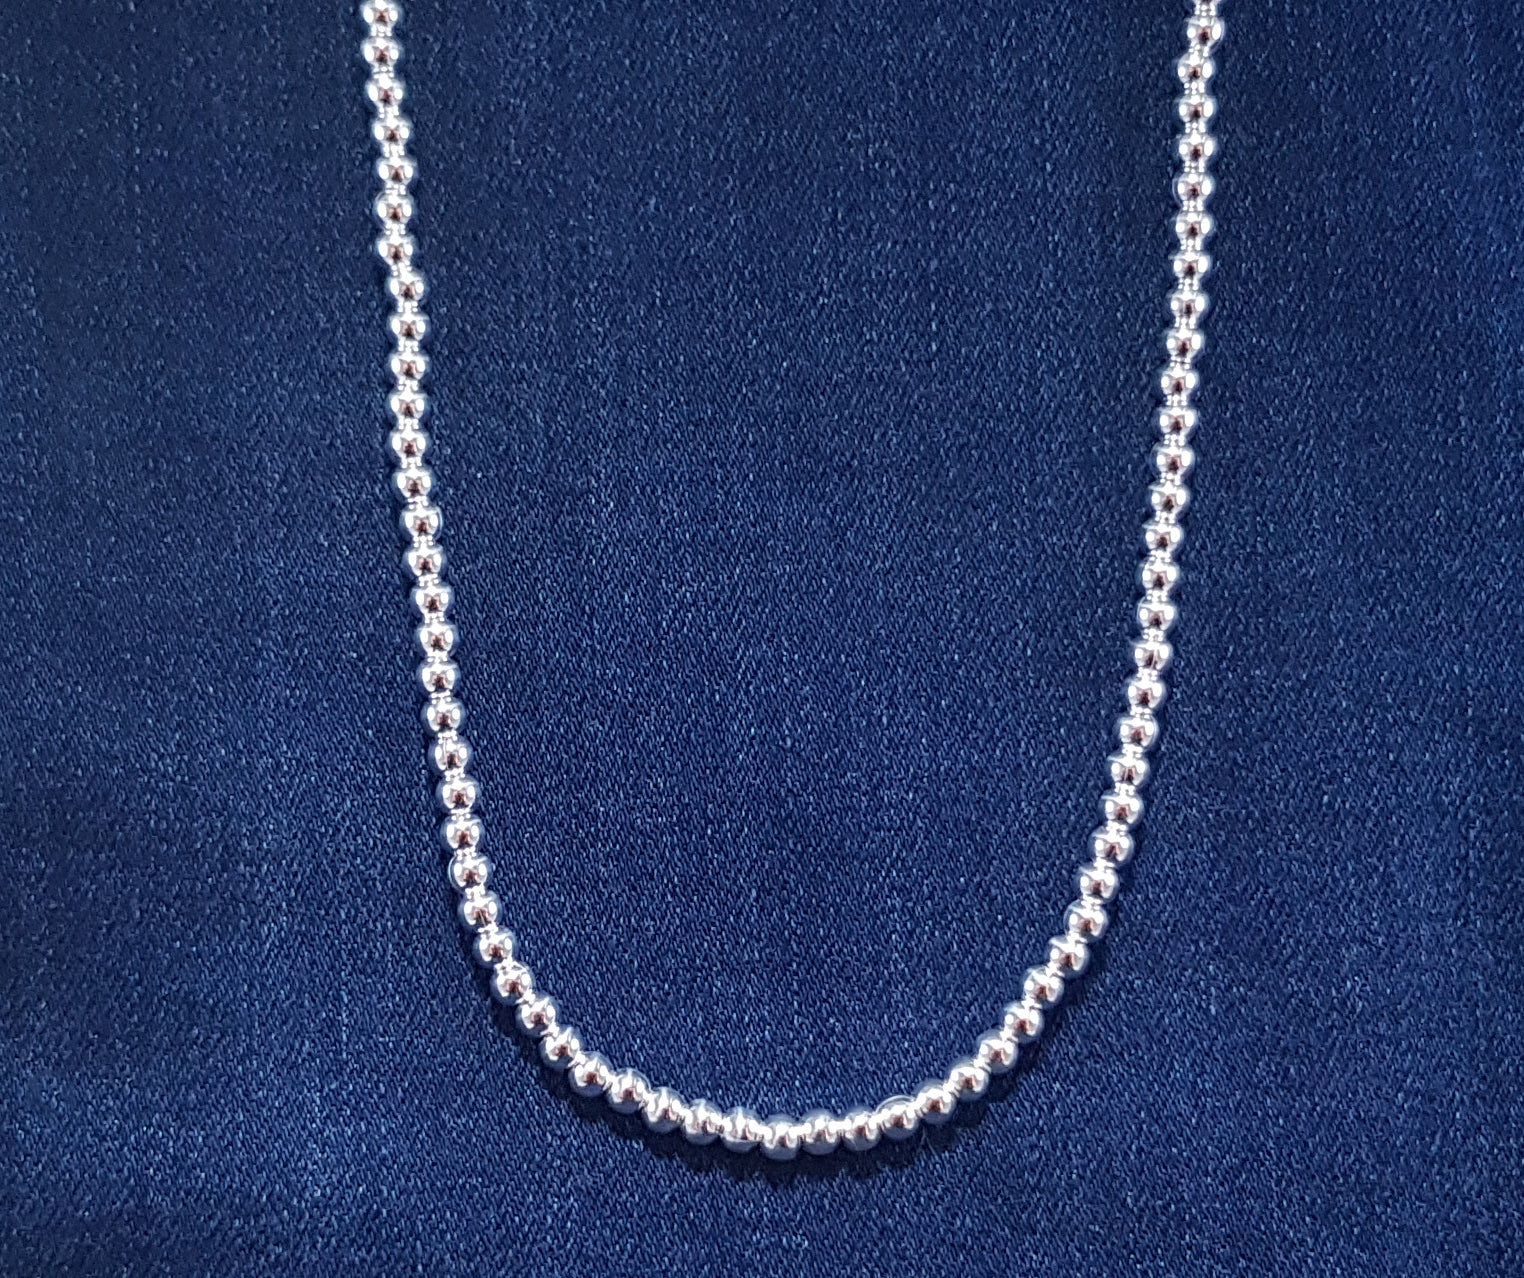 925 sterling silver ball bead necklace 14mm